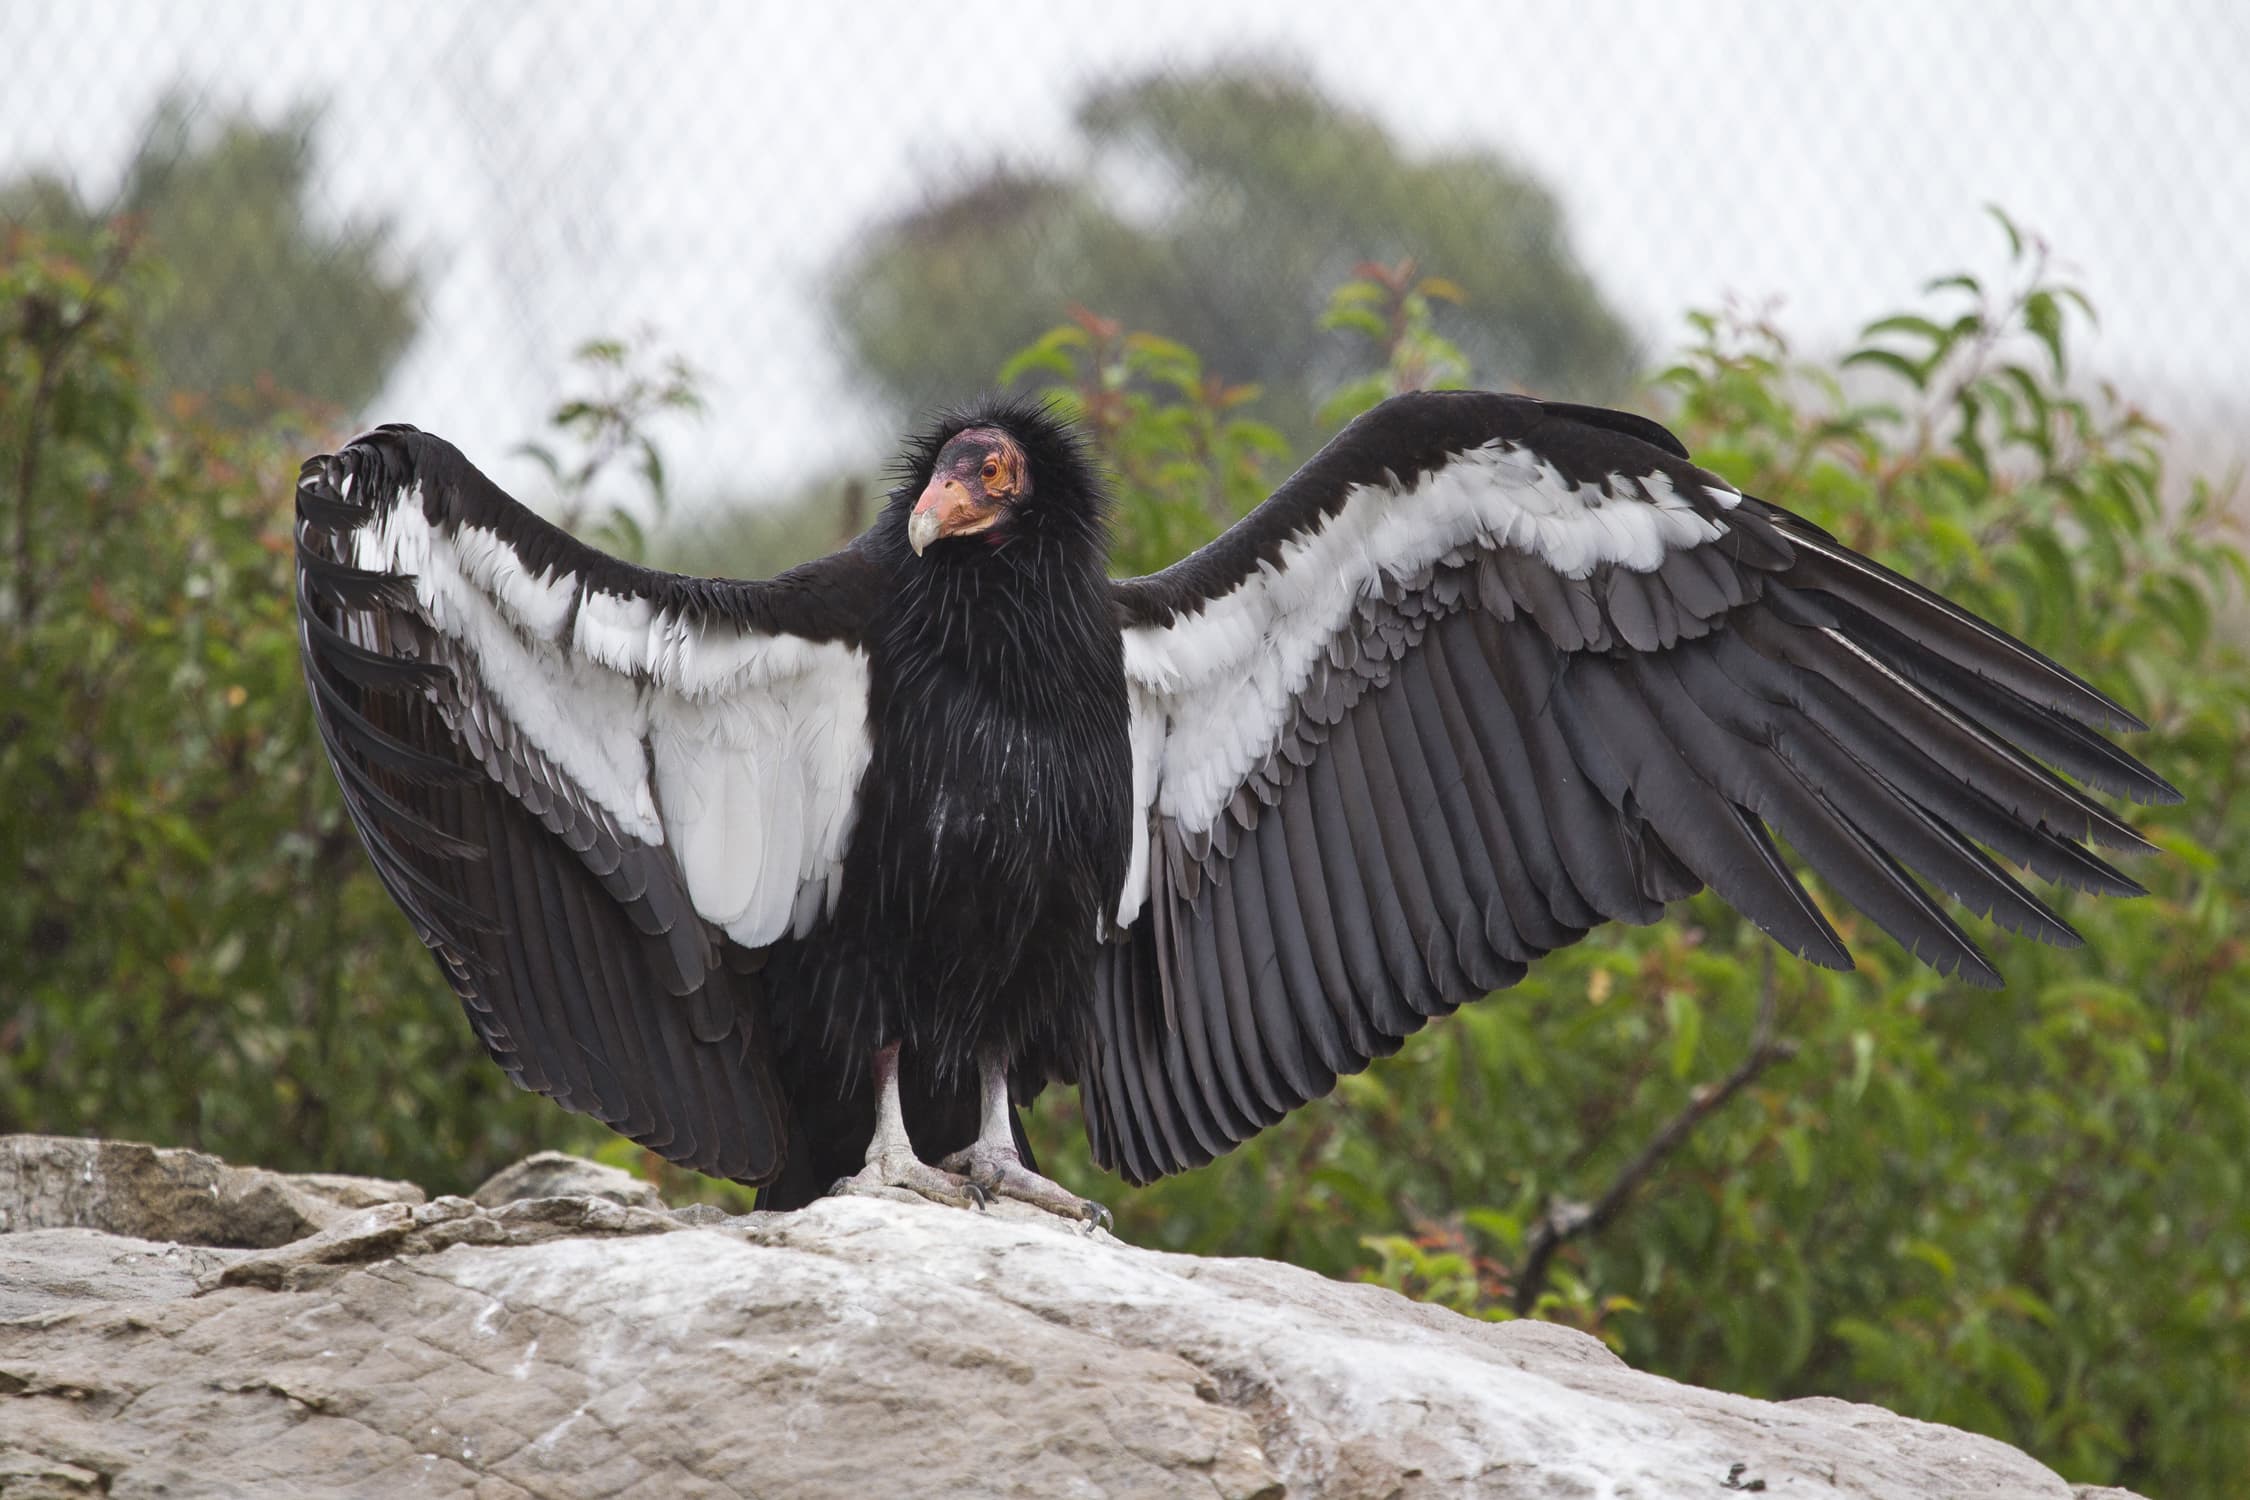 During a routine analysis of biological samples from two California condors in the San Diego Zoo Wildlife Alliance’s managed breeding program, scientists confirmed that each condor chick was genetically related to the respective female condor that laid the egg from which it hatched. However, they found that neither bird was genetically related to a male. (San Diego Zoo Wildlife Alliance)